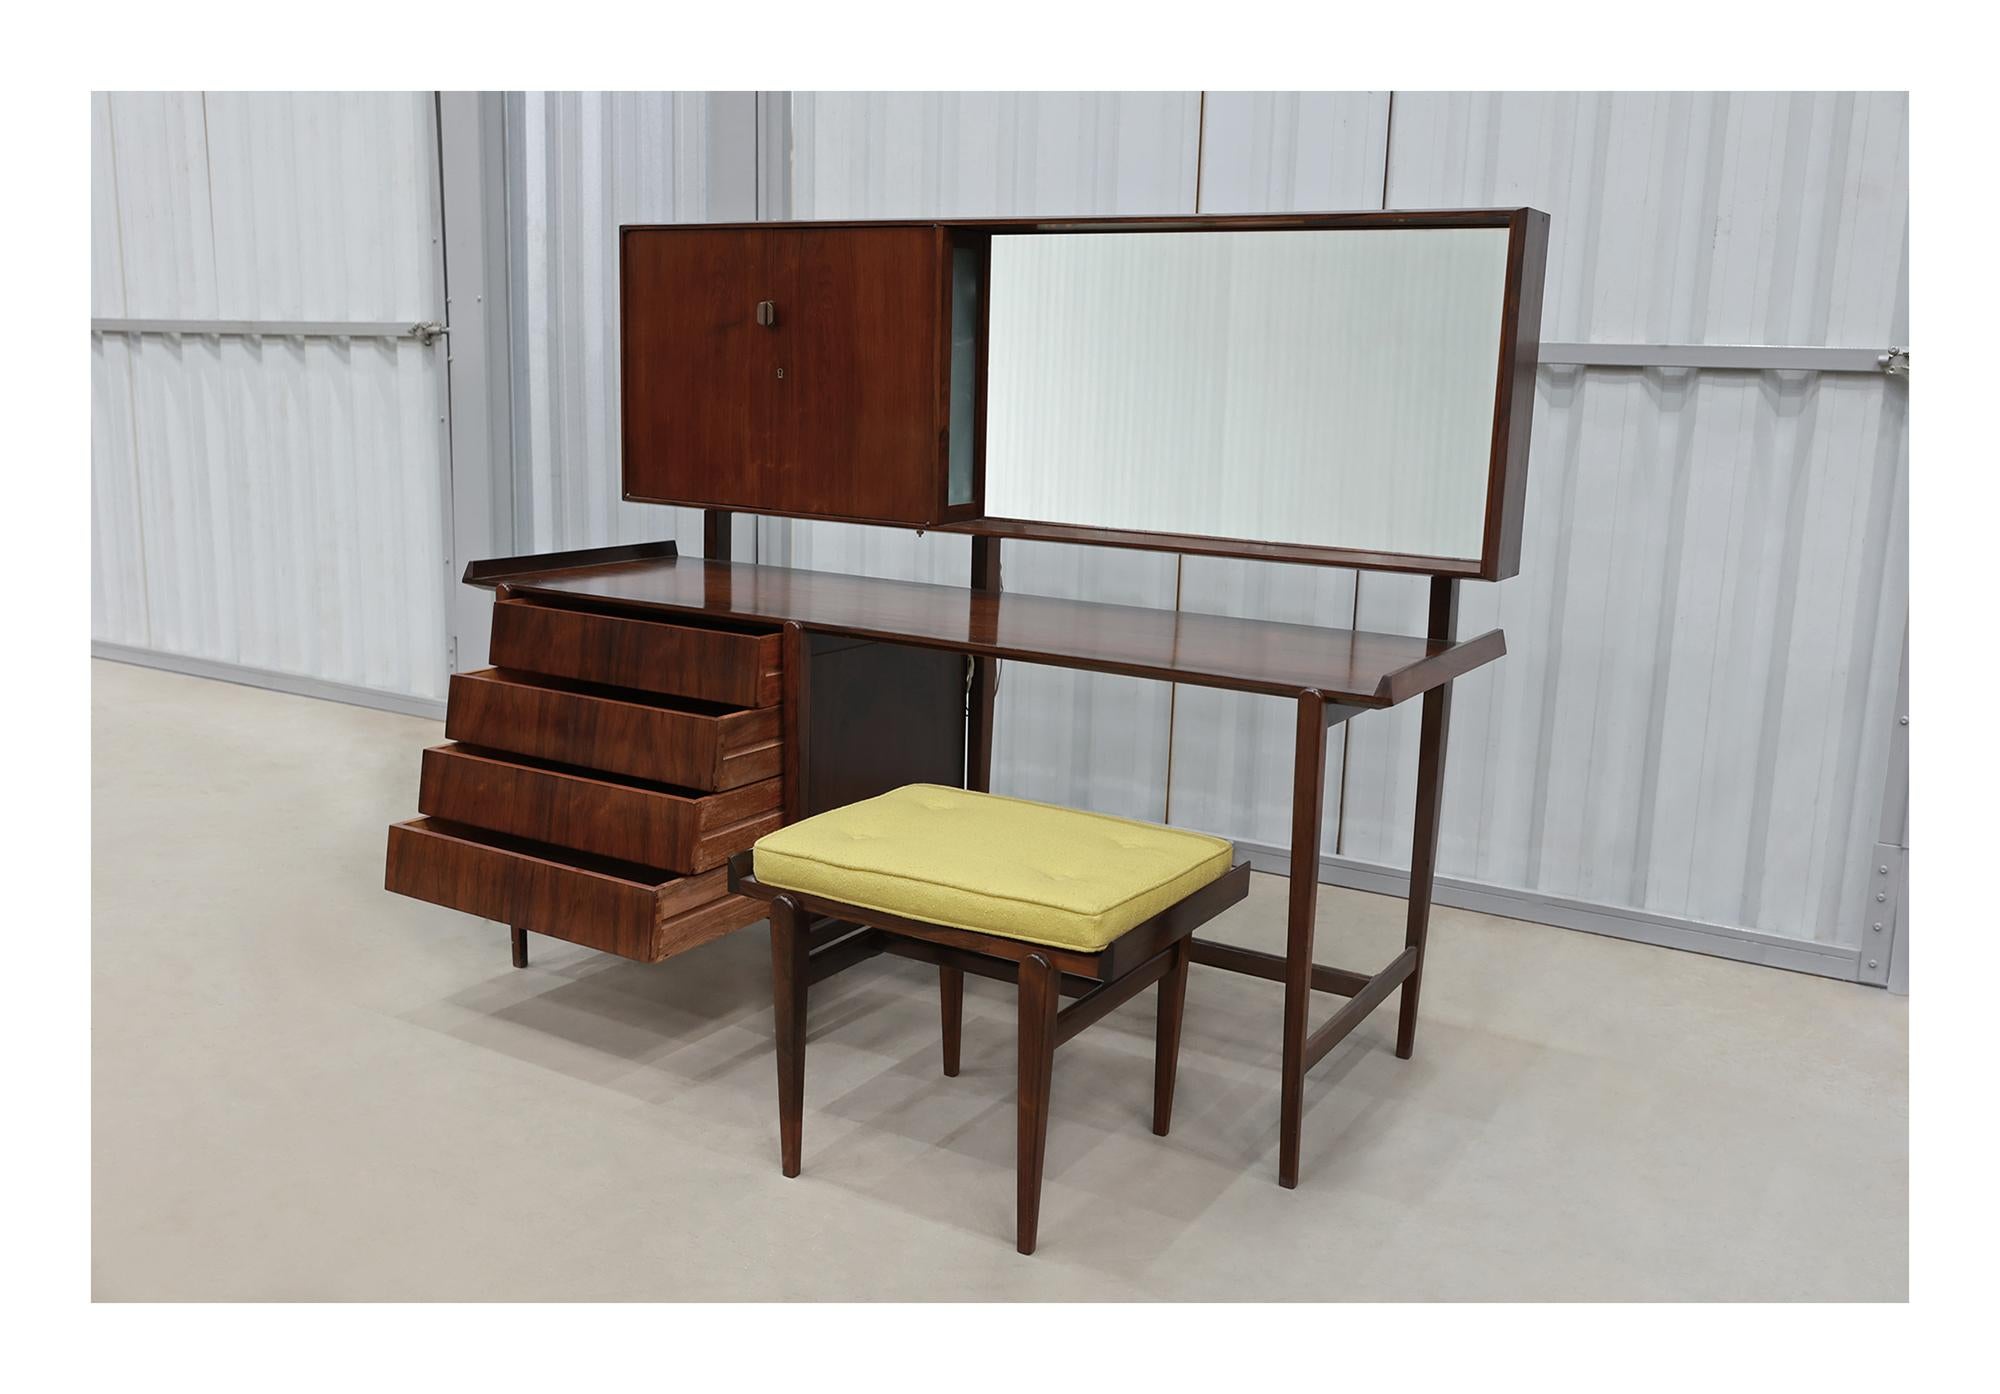 This set comes with a stool and a dresser that has a mirror, four drawers, and one cabinet. The light in the dresser has been rewired and works perfectly. The set is made with Brazilian hardwood and it has a beautiful color and pattern to it. The